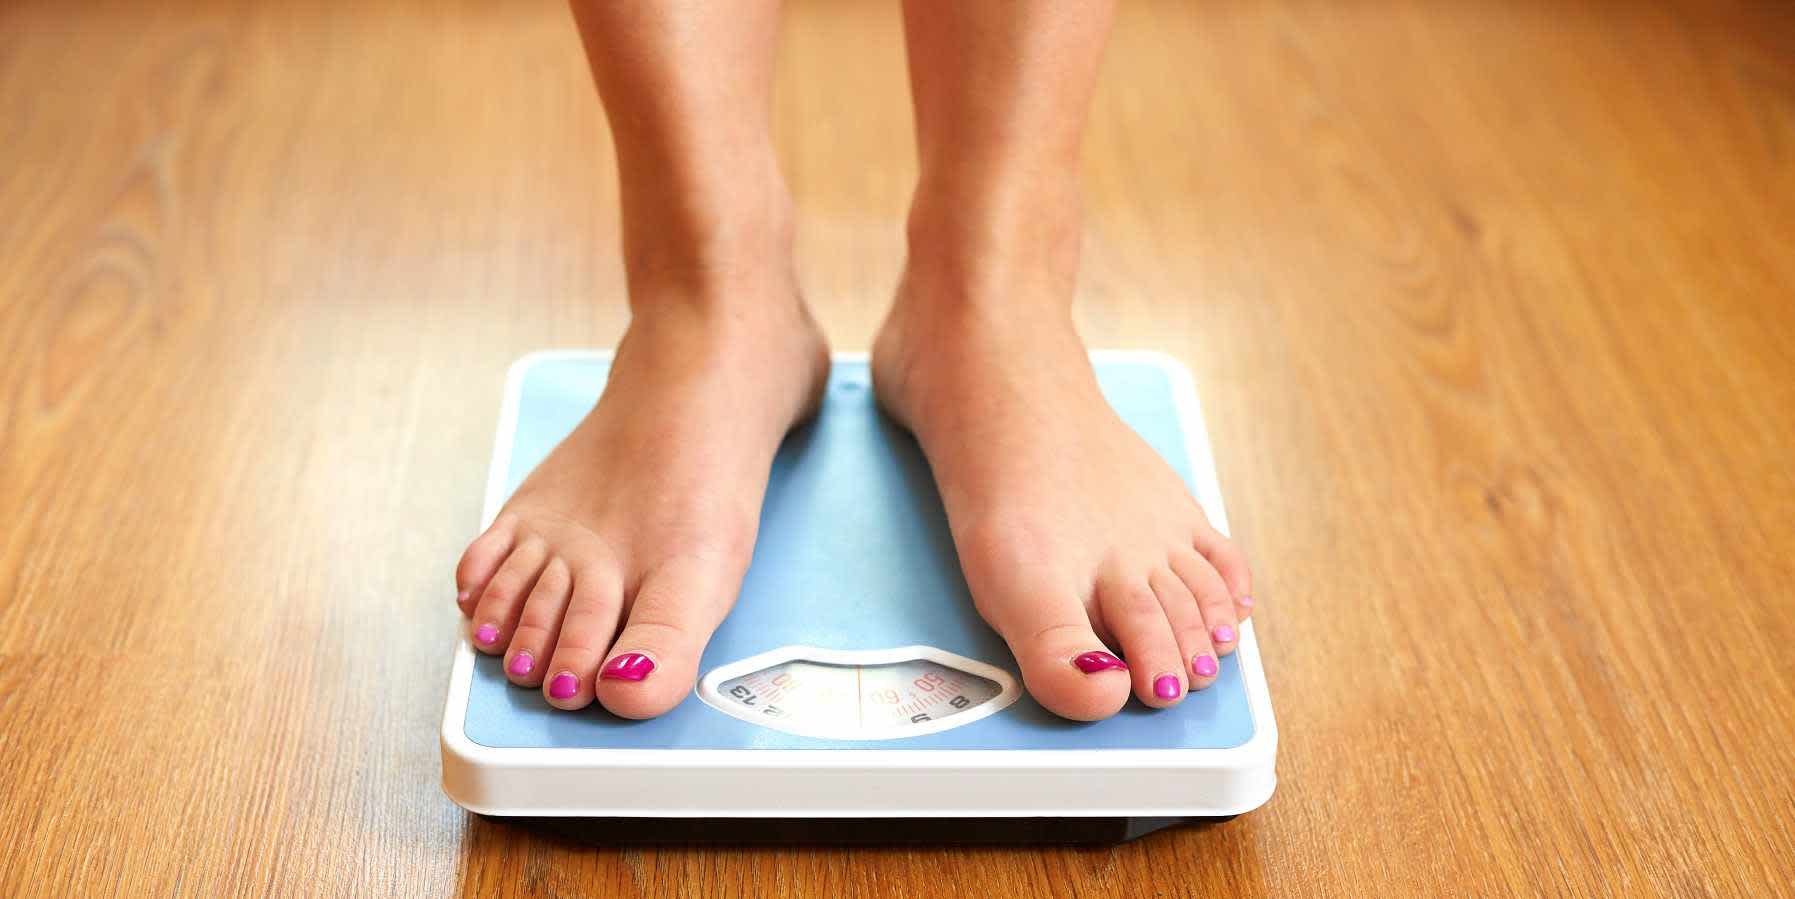 Lifestyle Changes to Lose Weight: How It Works